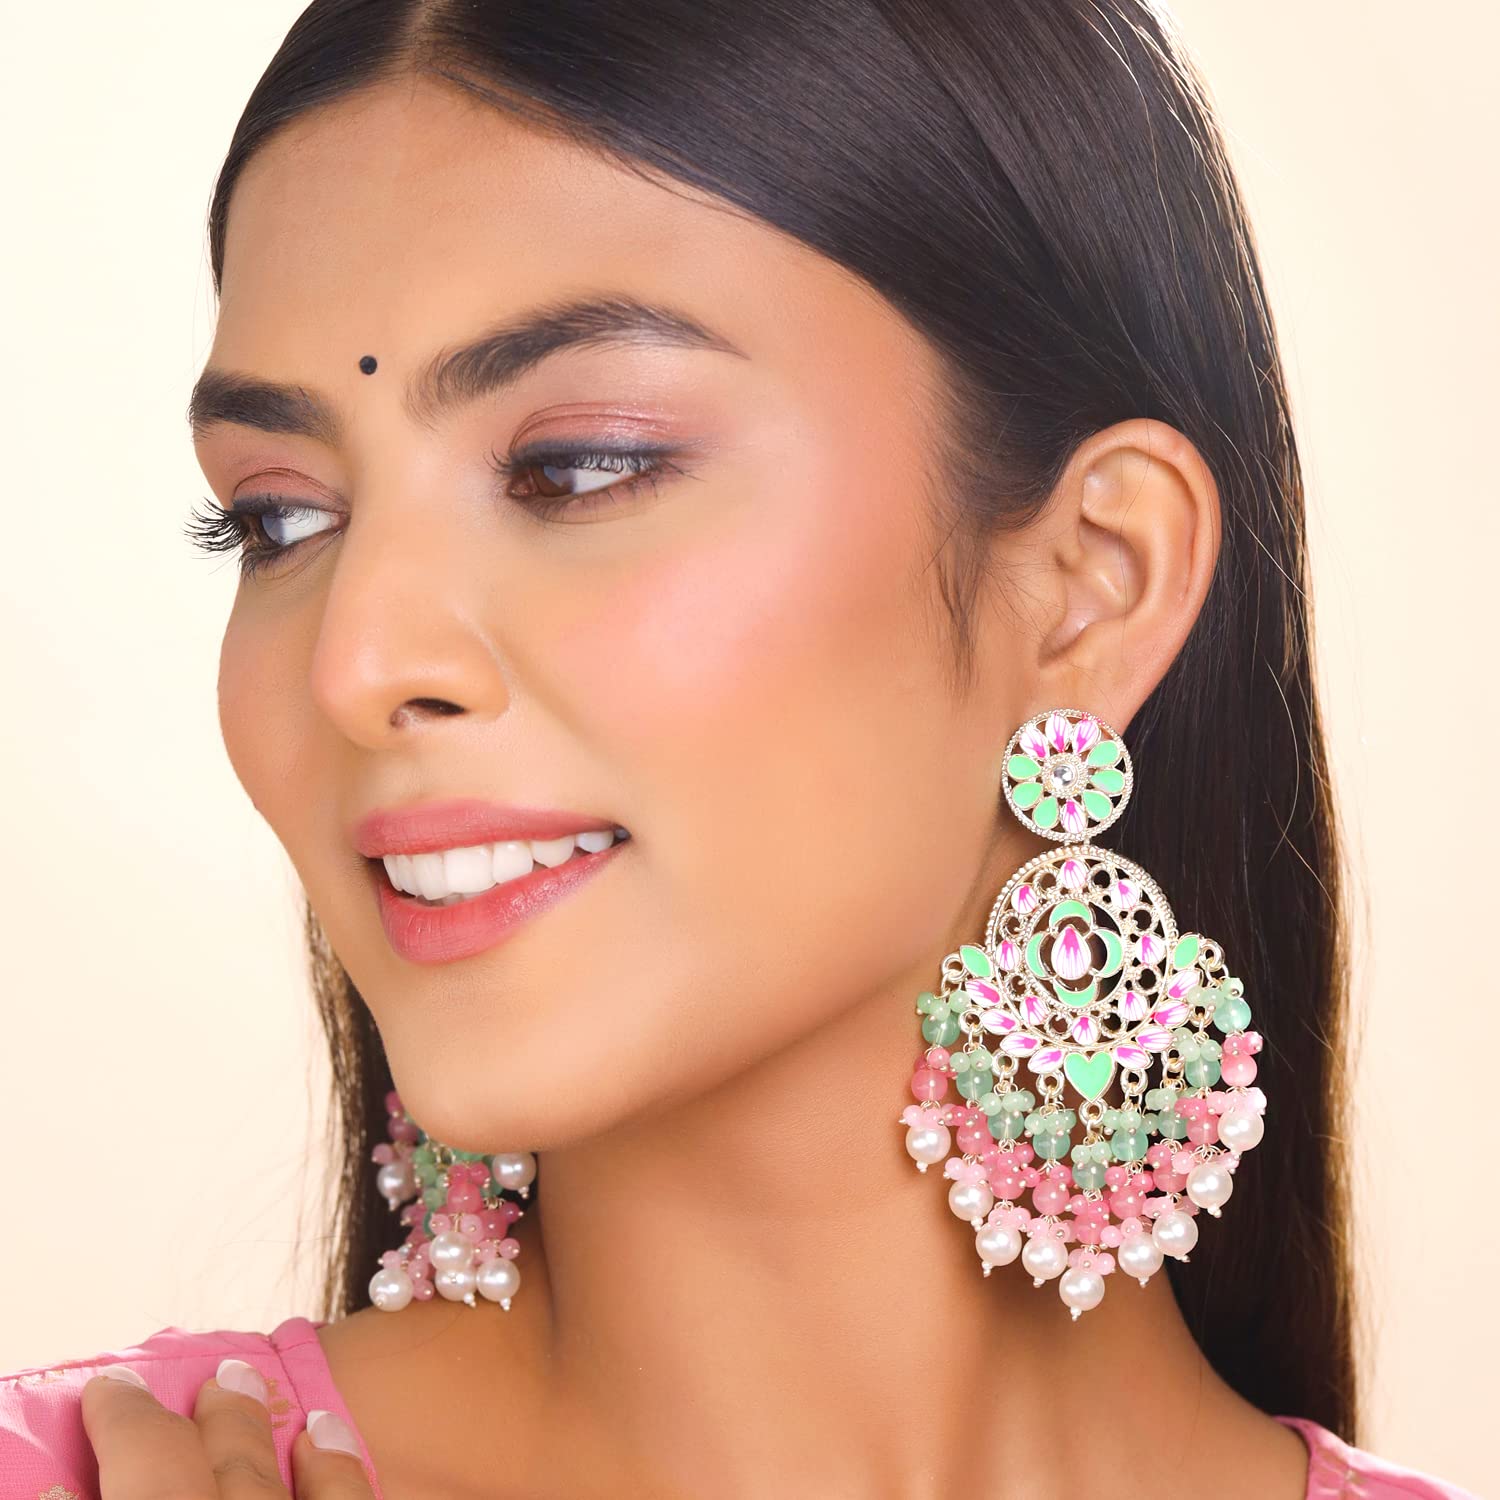 Yellow Chimes Earrings for Women and Girls Meenakari Chandbali | Gold Plated Green Pink Meenakari Chandbali Earrings | Birthday Gift for girls and women Anniversary Gift for Wife